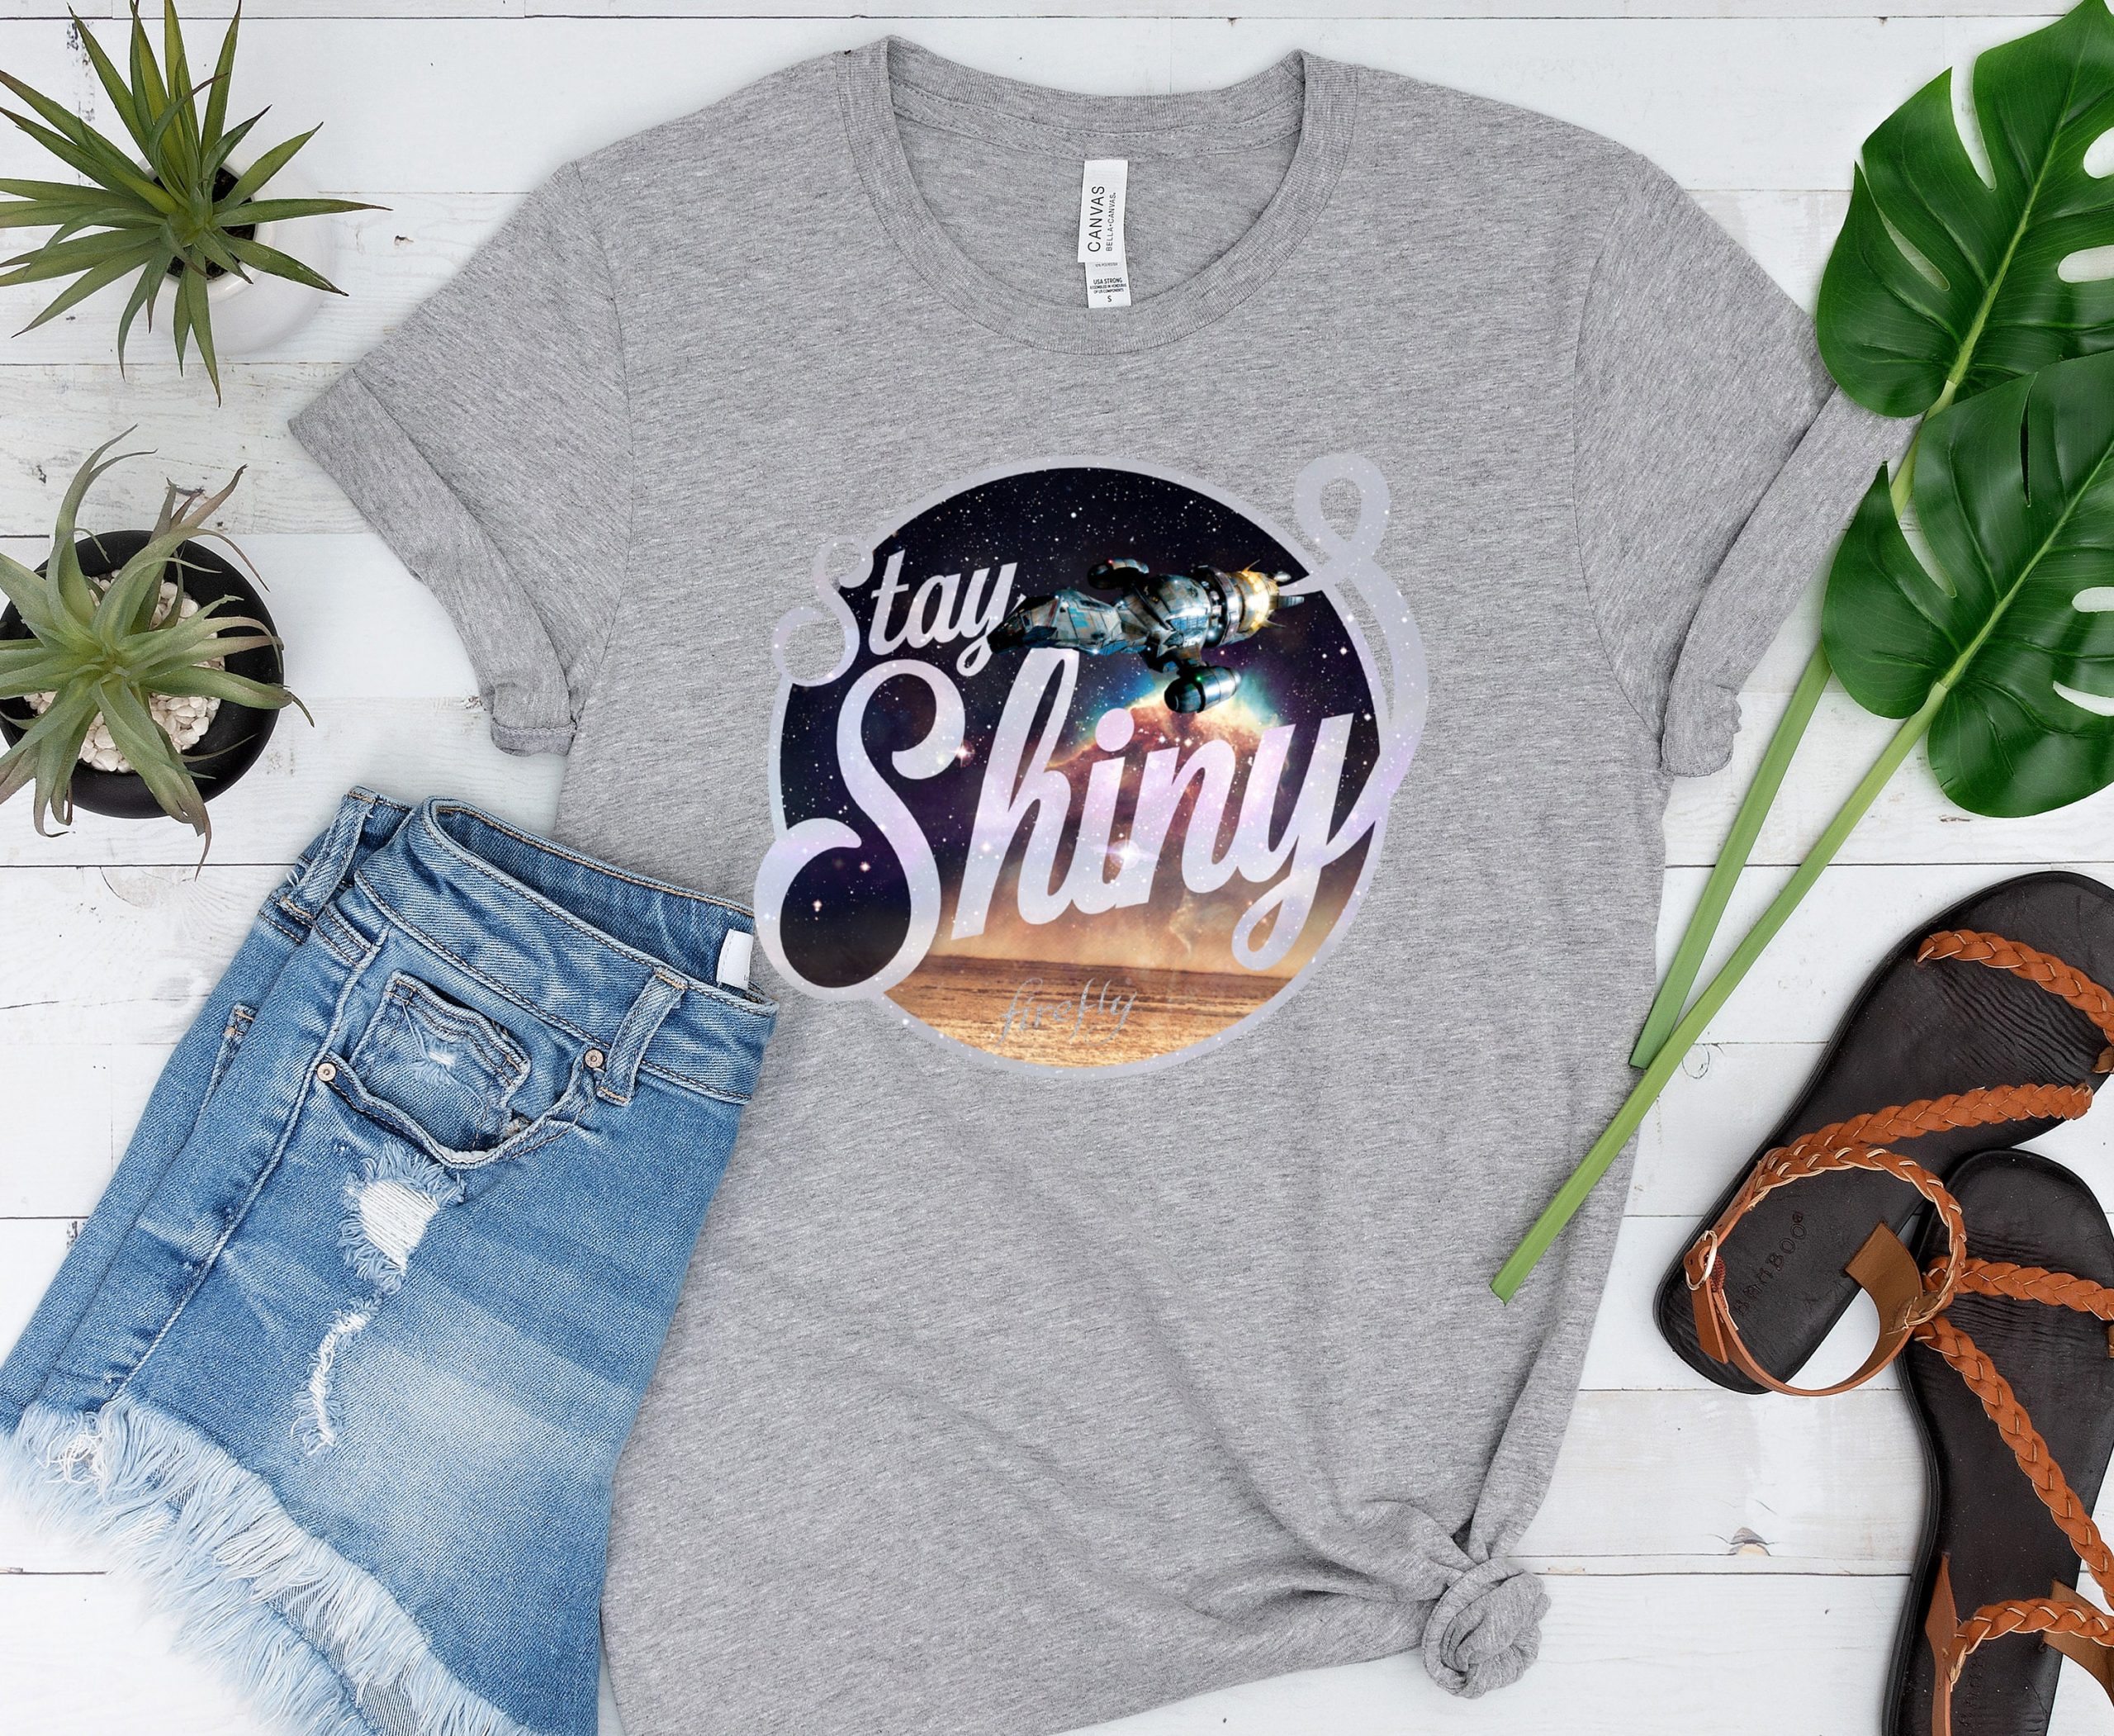 Stay Shiny Tv Sci-Fi Firefly Quote Comic Con Unisex T-Shirt